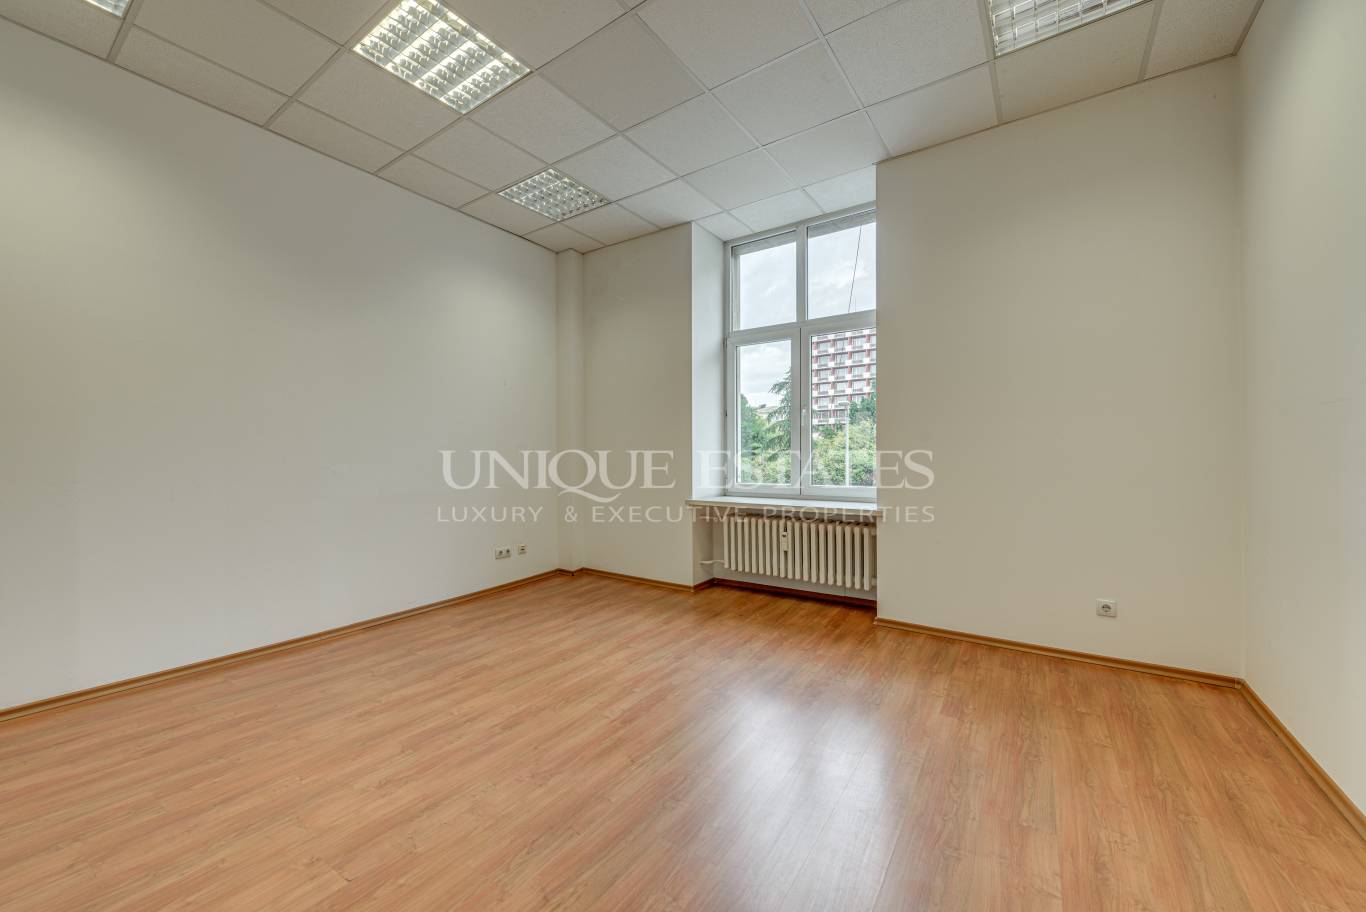 Office for rent in Sofia, Downtown with listing ID: K4831 - image 8